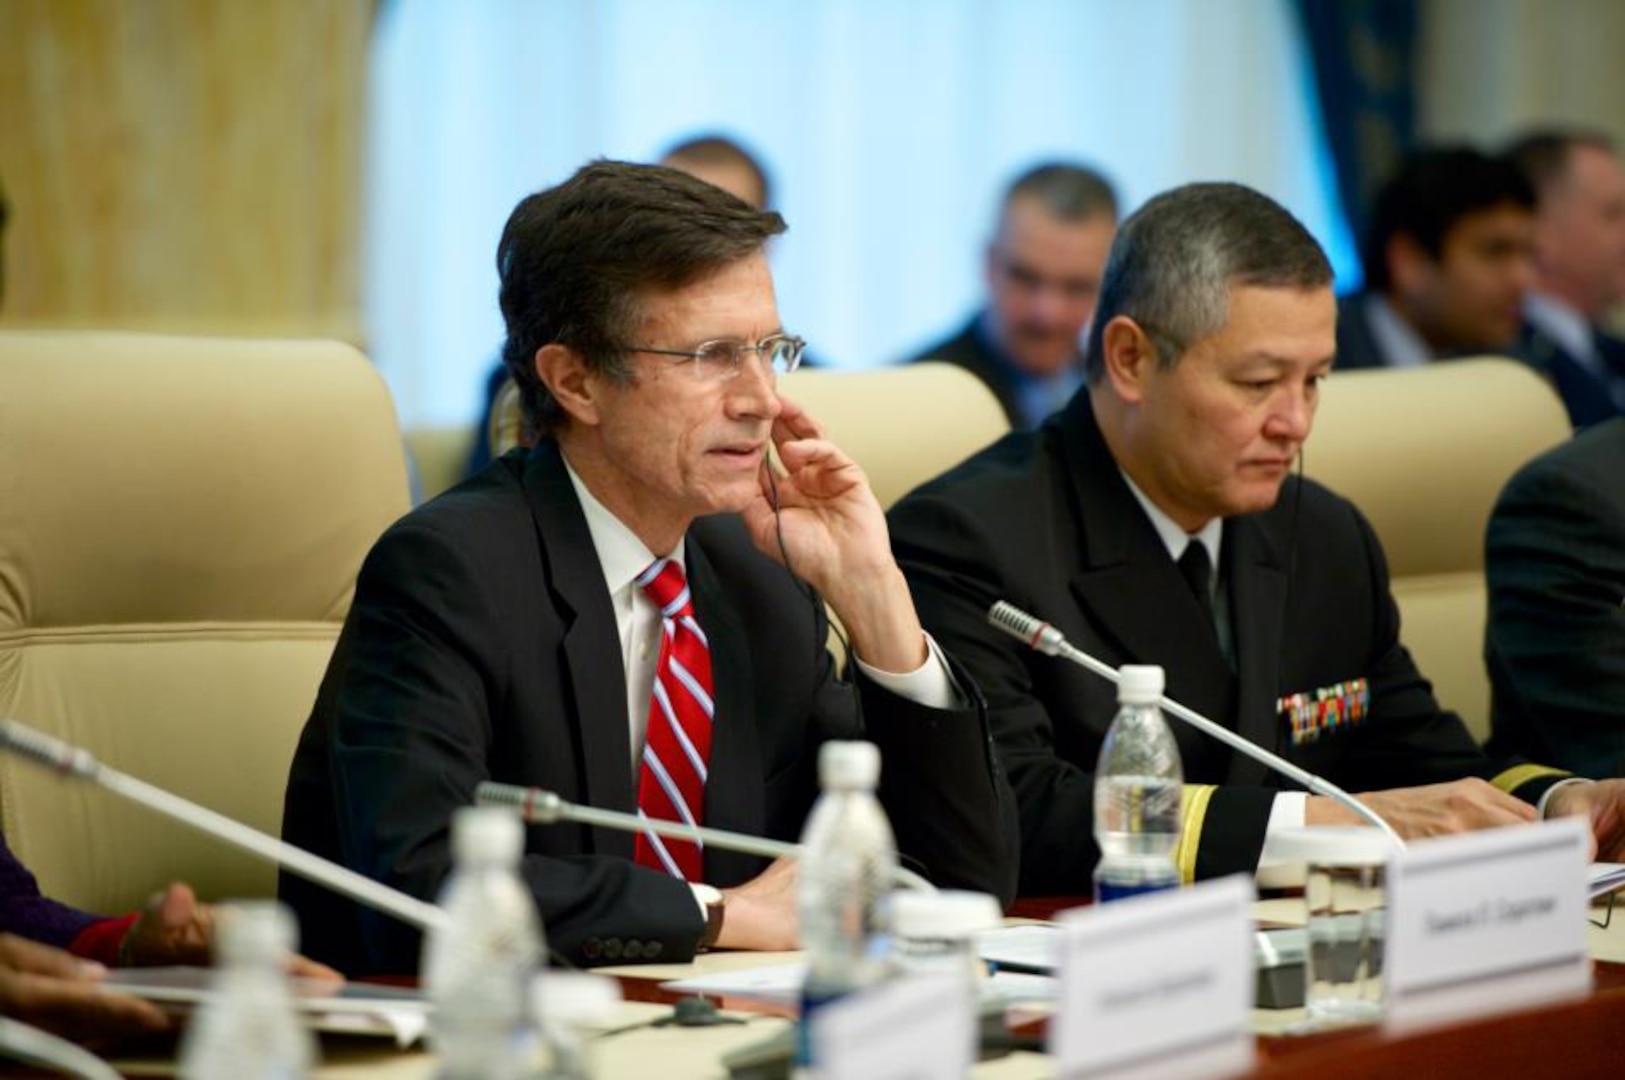 Rear Adm. Ron. J. MacLaren (right) and Asst. Sec. of State Robert Blake Jr. listen to the Kyrgyz delegation's remarks at the Annual Bilateral Consultation between the U.S. and Kyrgyzstan in Bishkek, January 2012. MacLaren was there to discuss local procurement efforts of the Defense Logistics Agency and other U.S. government agencies in Kyrgyzstan in support of U.S. troops in Afghanistan. 